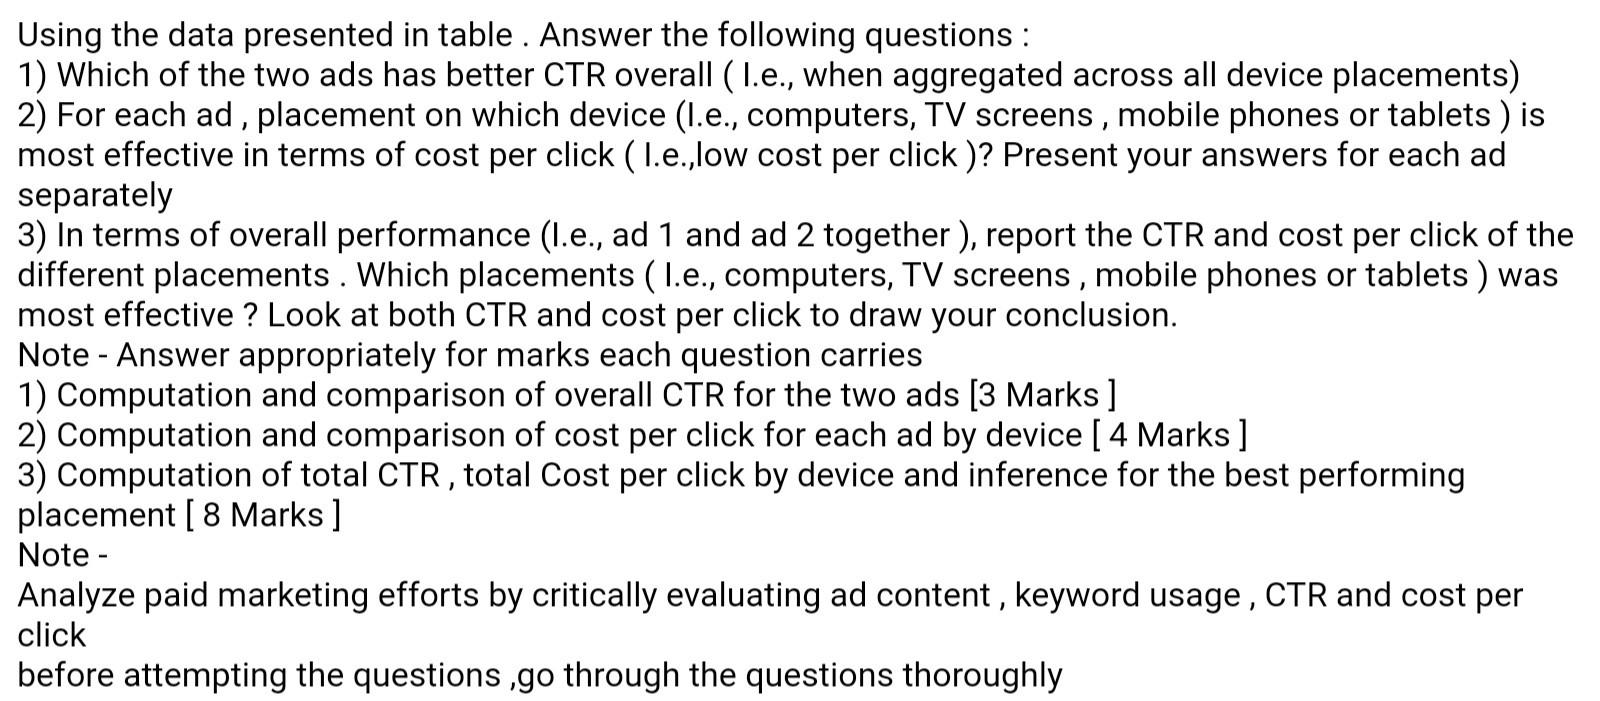 Using the data presented in table . Answer the following questions :
1) Which of the two ads has better CTR overall (1.e., wh